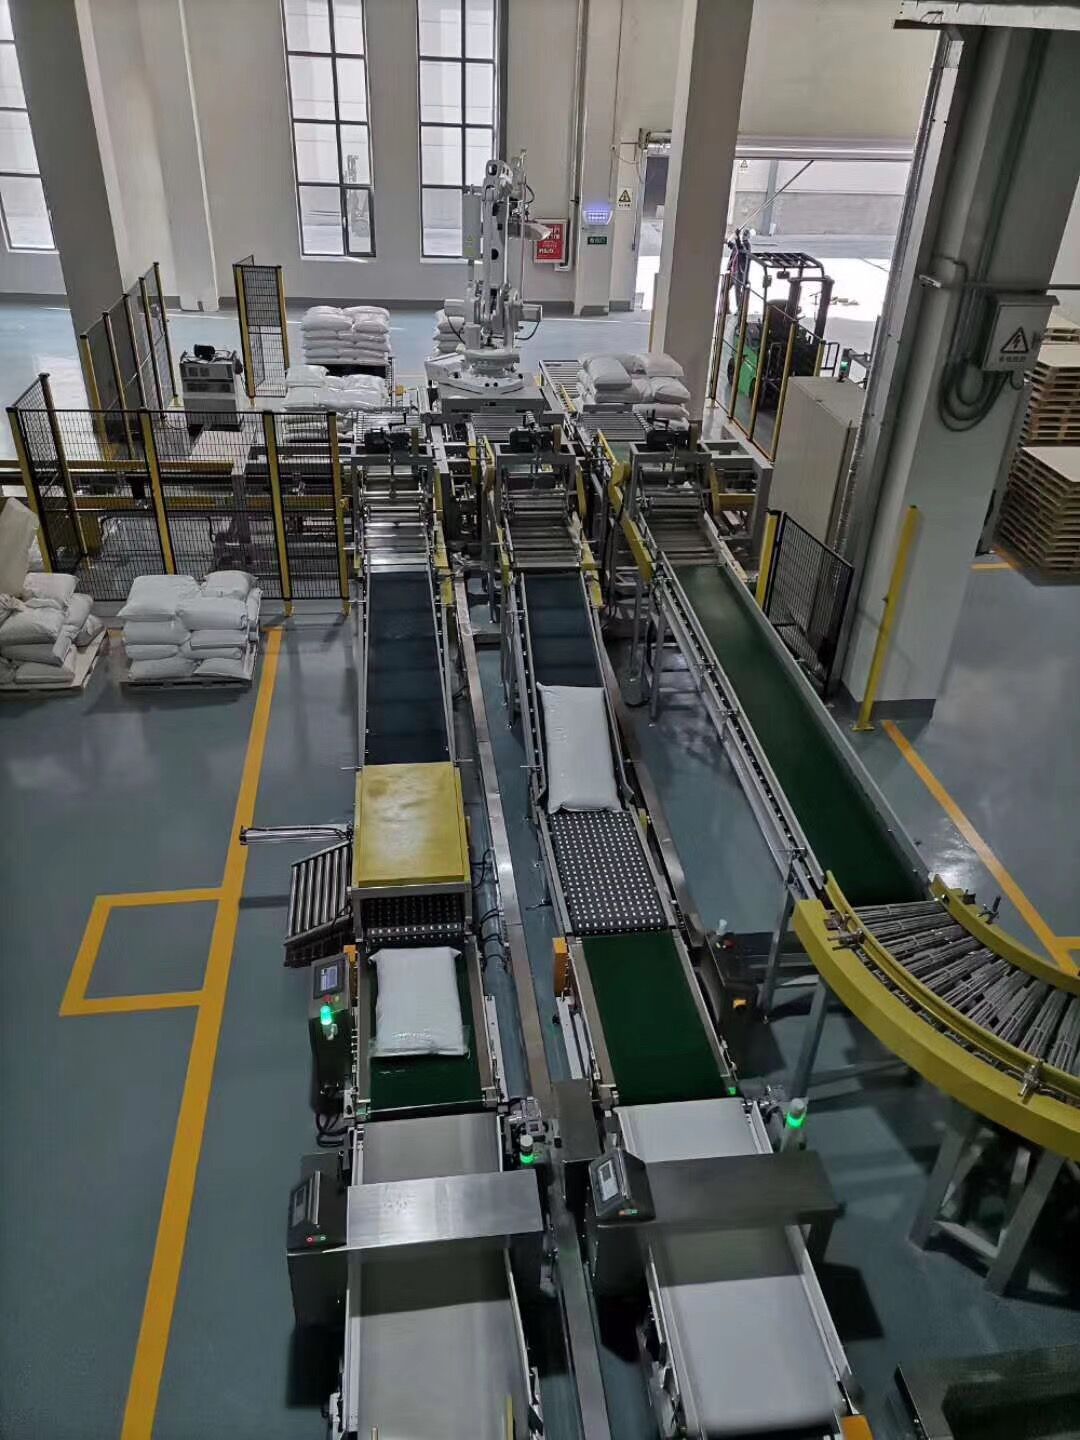 Soya Blends bagging machine Automated Bagging Line Fully Automatic Packing Palletizing Line, Fully Automatic Packing Line, Fully Automatic Bagging Line, Fully Automatic filling and packaging line, aut